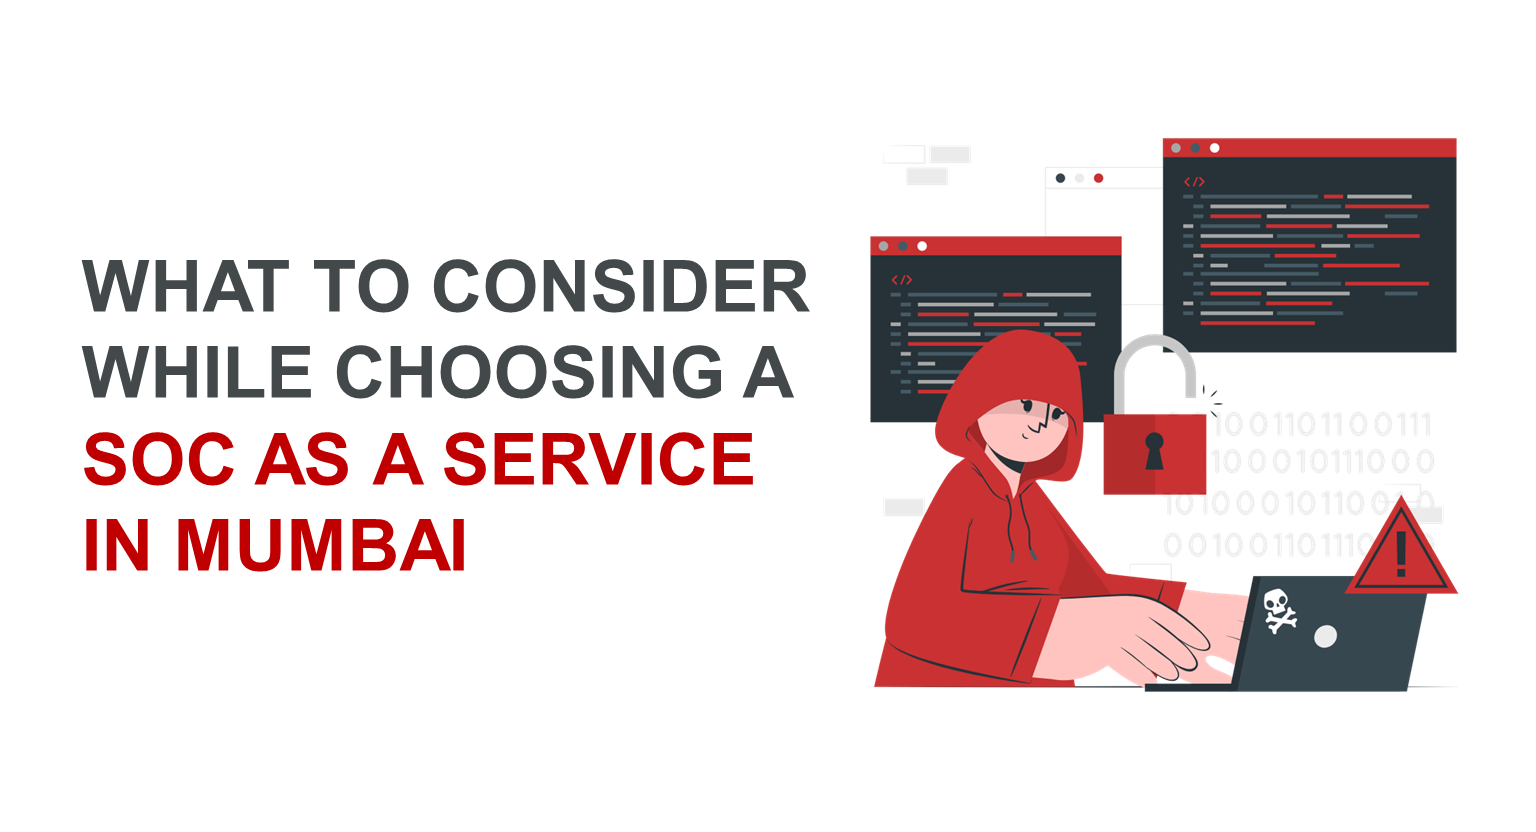 What to consider while choosing a SOC as a service in Mumbai